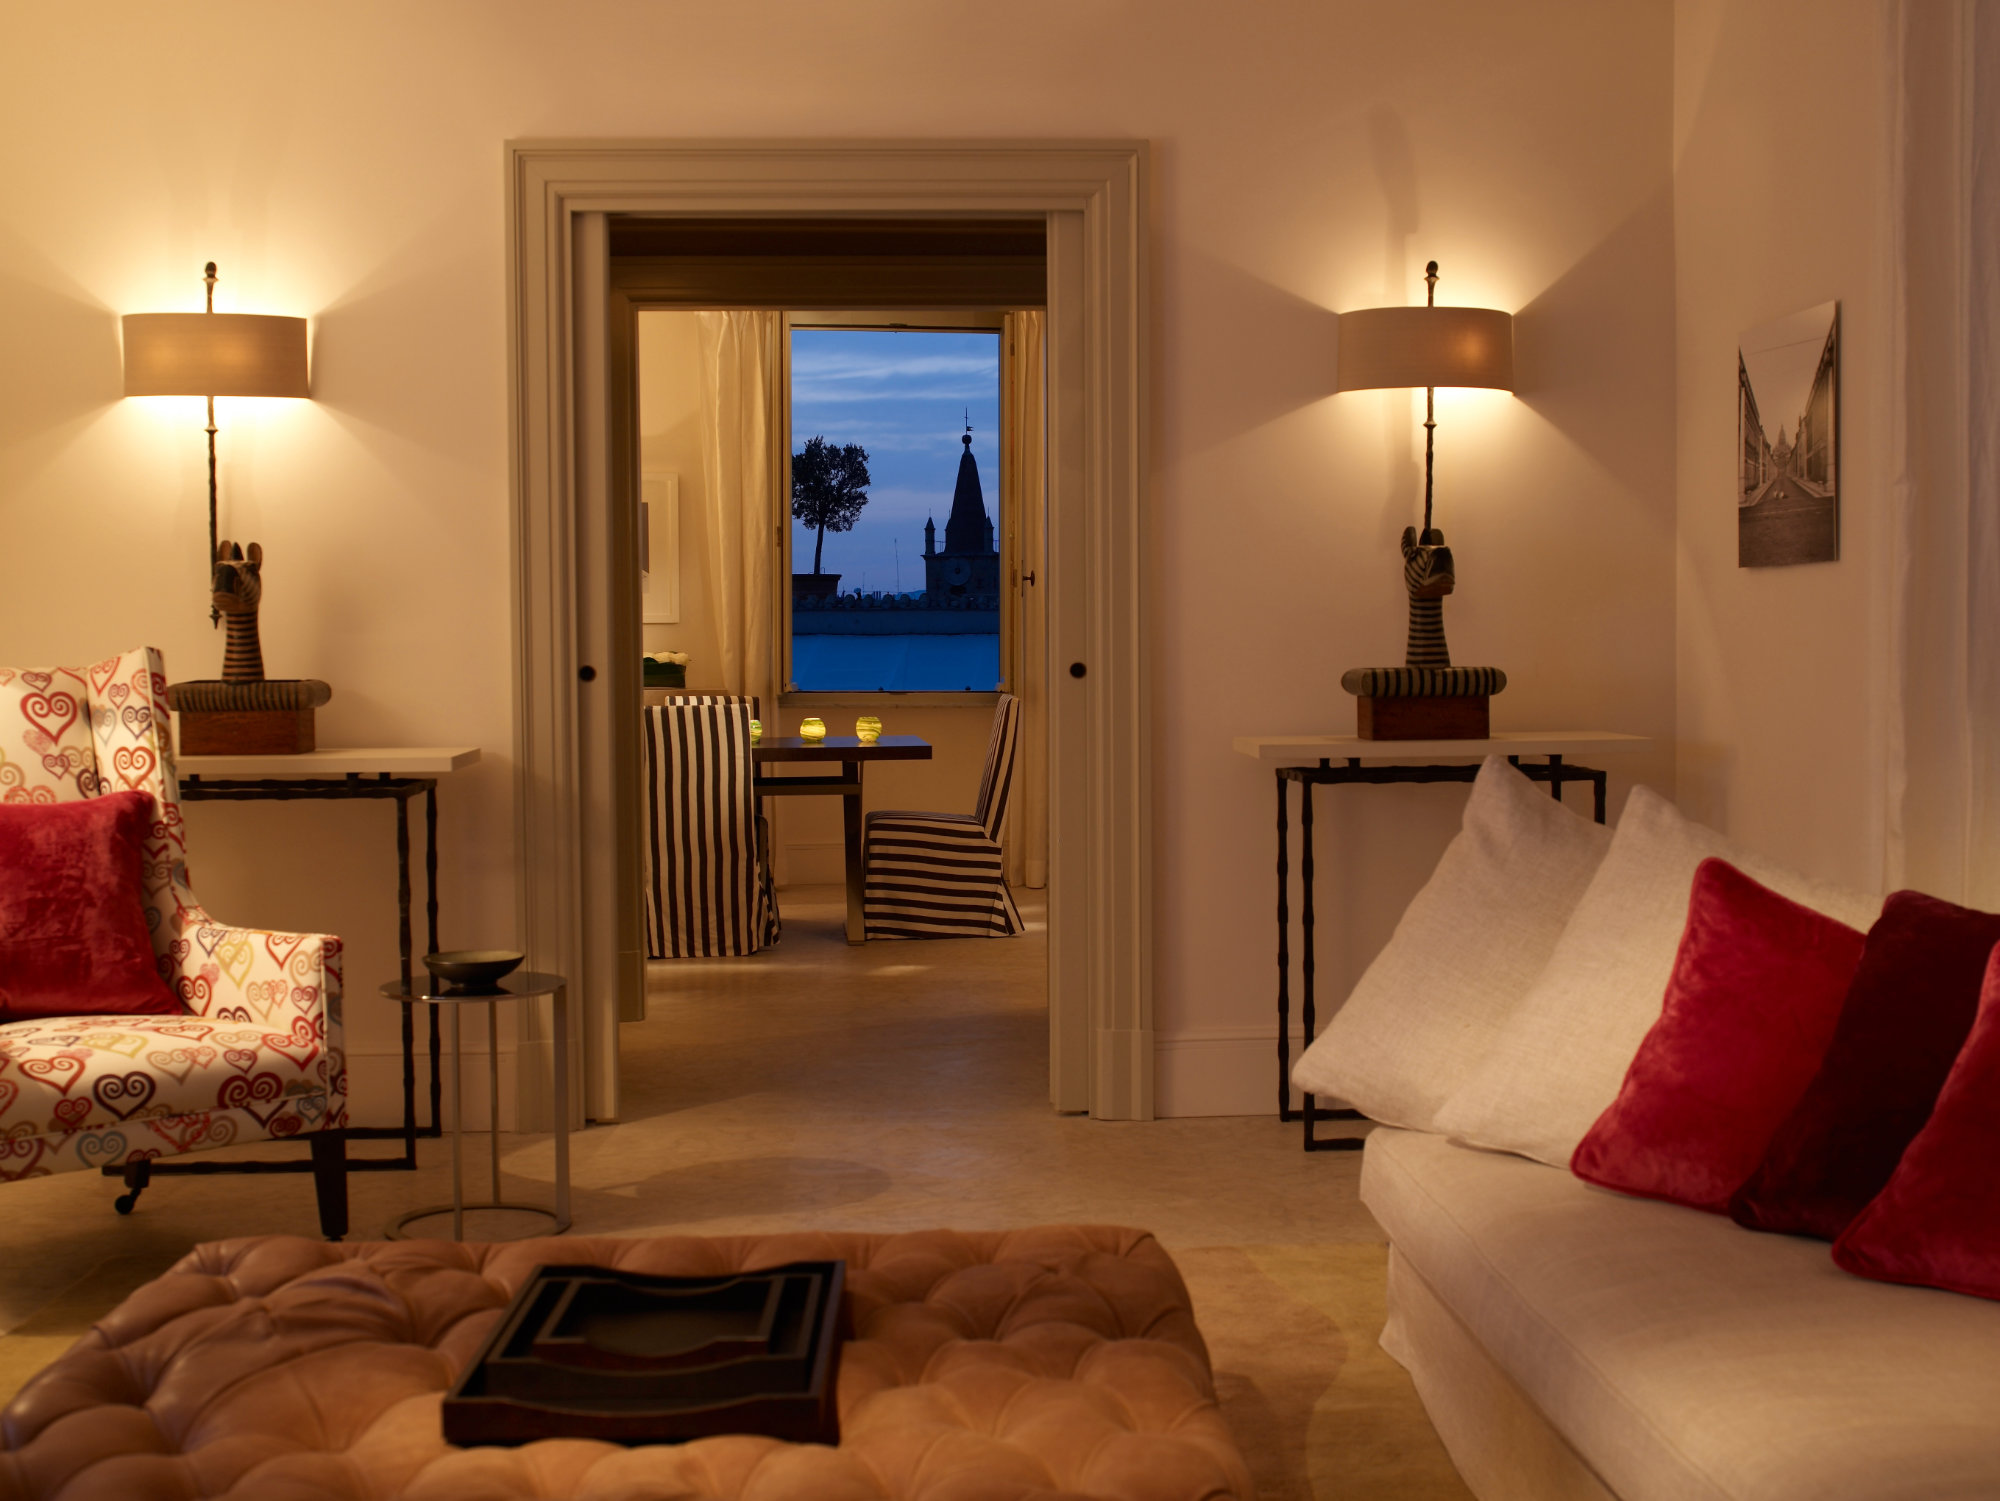 Hotel De Russie suite living room with view of Rome. - Gitaly contract